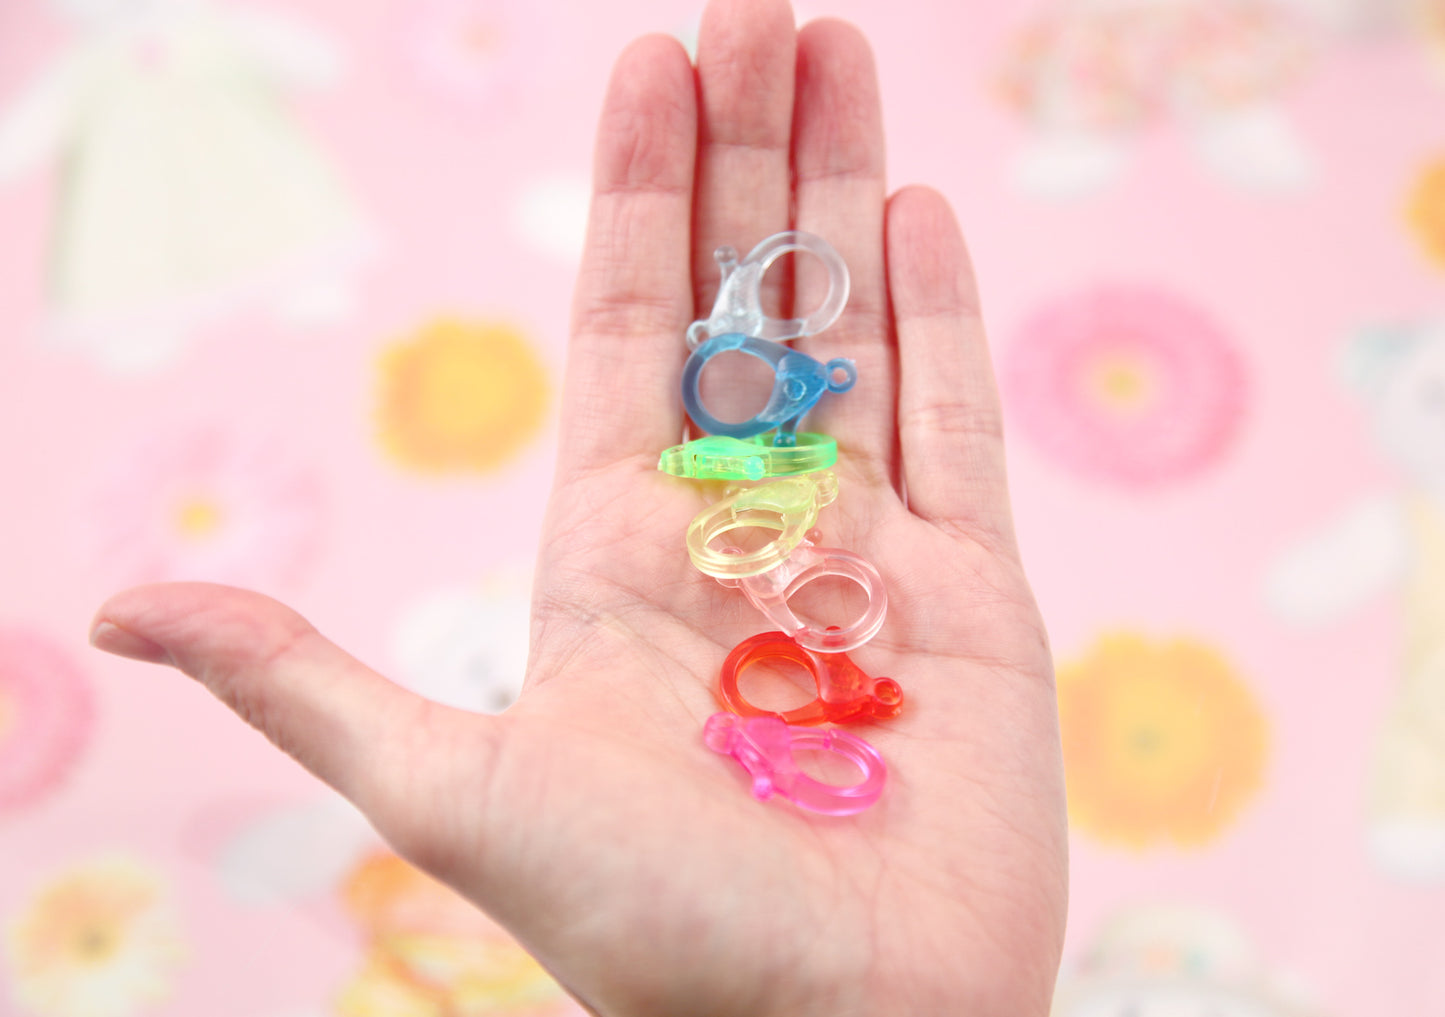 Big Plastic Lobster Clasp - 25mm Colorful Transparent Clear Plastic Clasp or Keychain Clip - 14 pc set